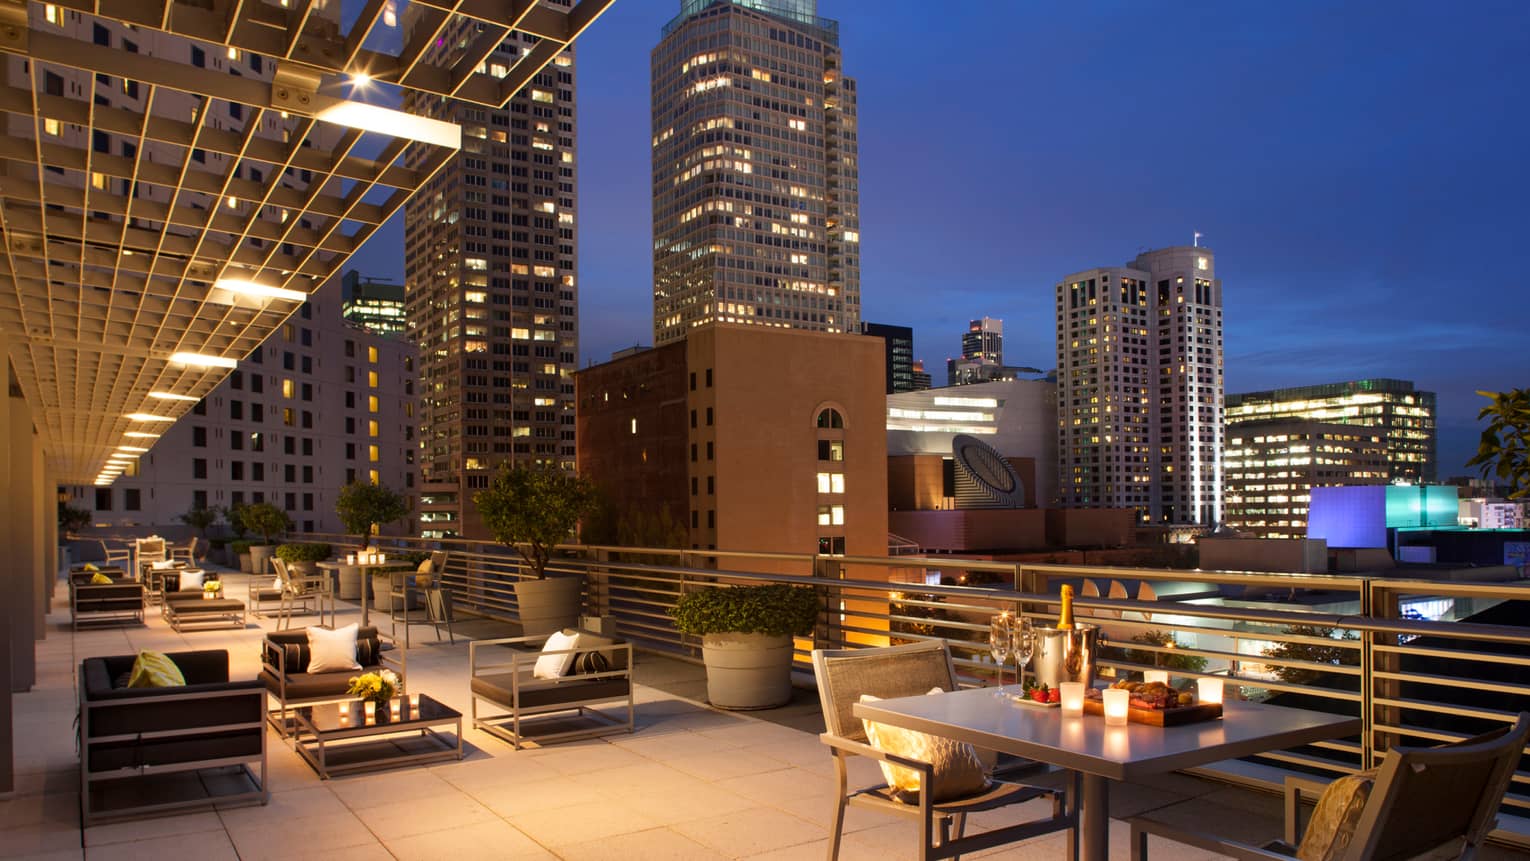 Large rooftop patio at night with candle-lit tables, champagne on ice, black cushioned chairs, city lights